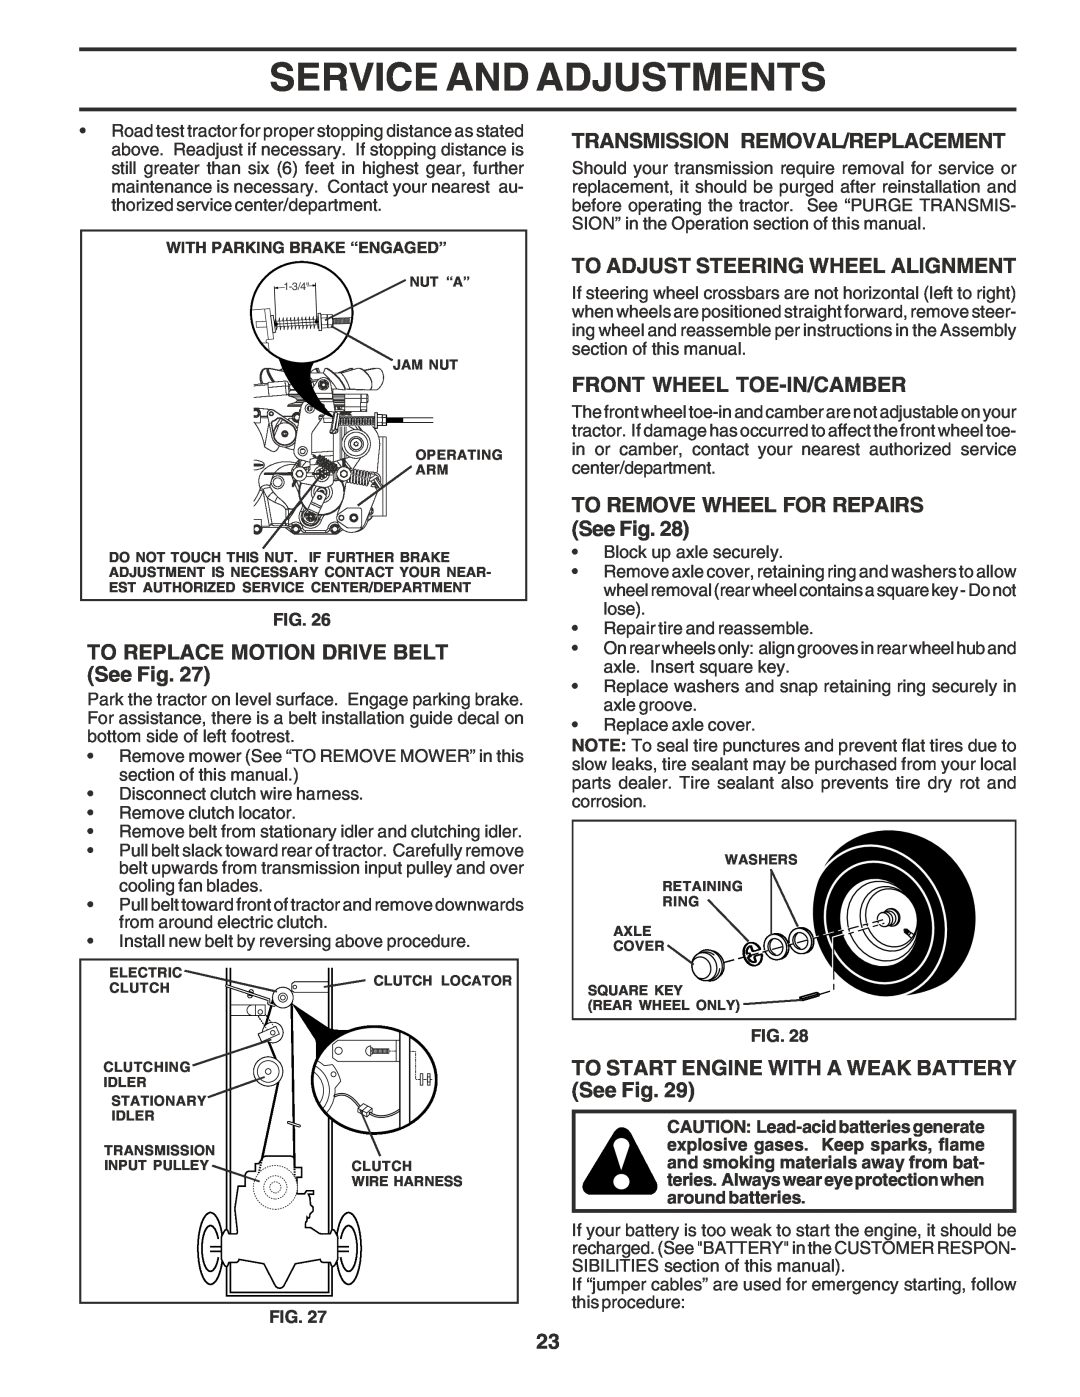 Poulan 180278 TO REPLACE MOTION DRIVE BELT See Fig, Transmission Removal/Replacement, To Adjust Steering Wheel Alignment 